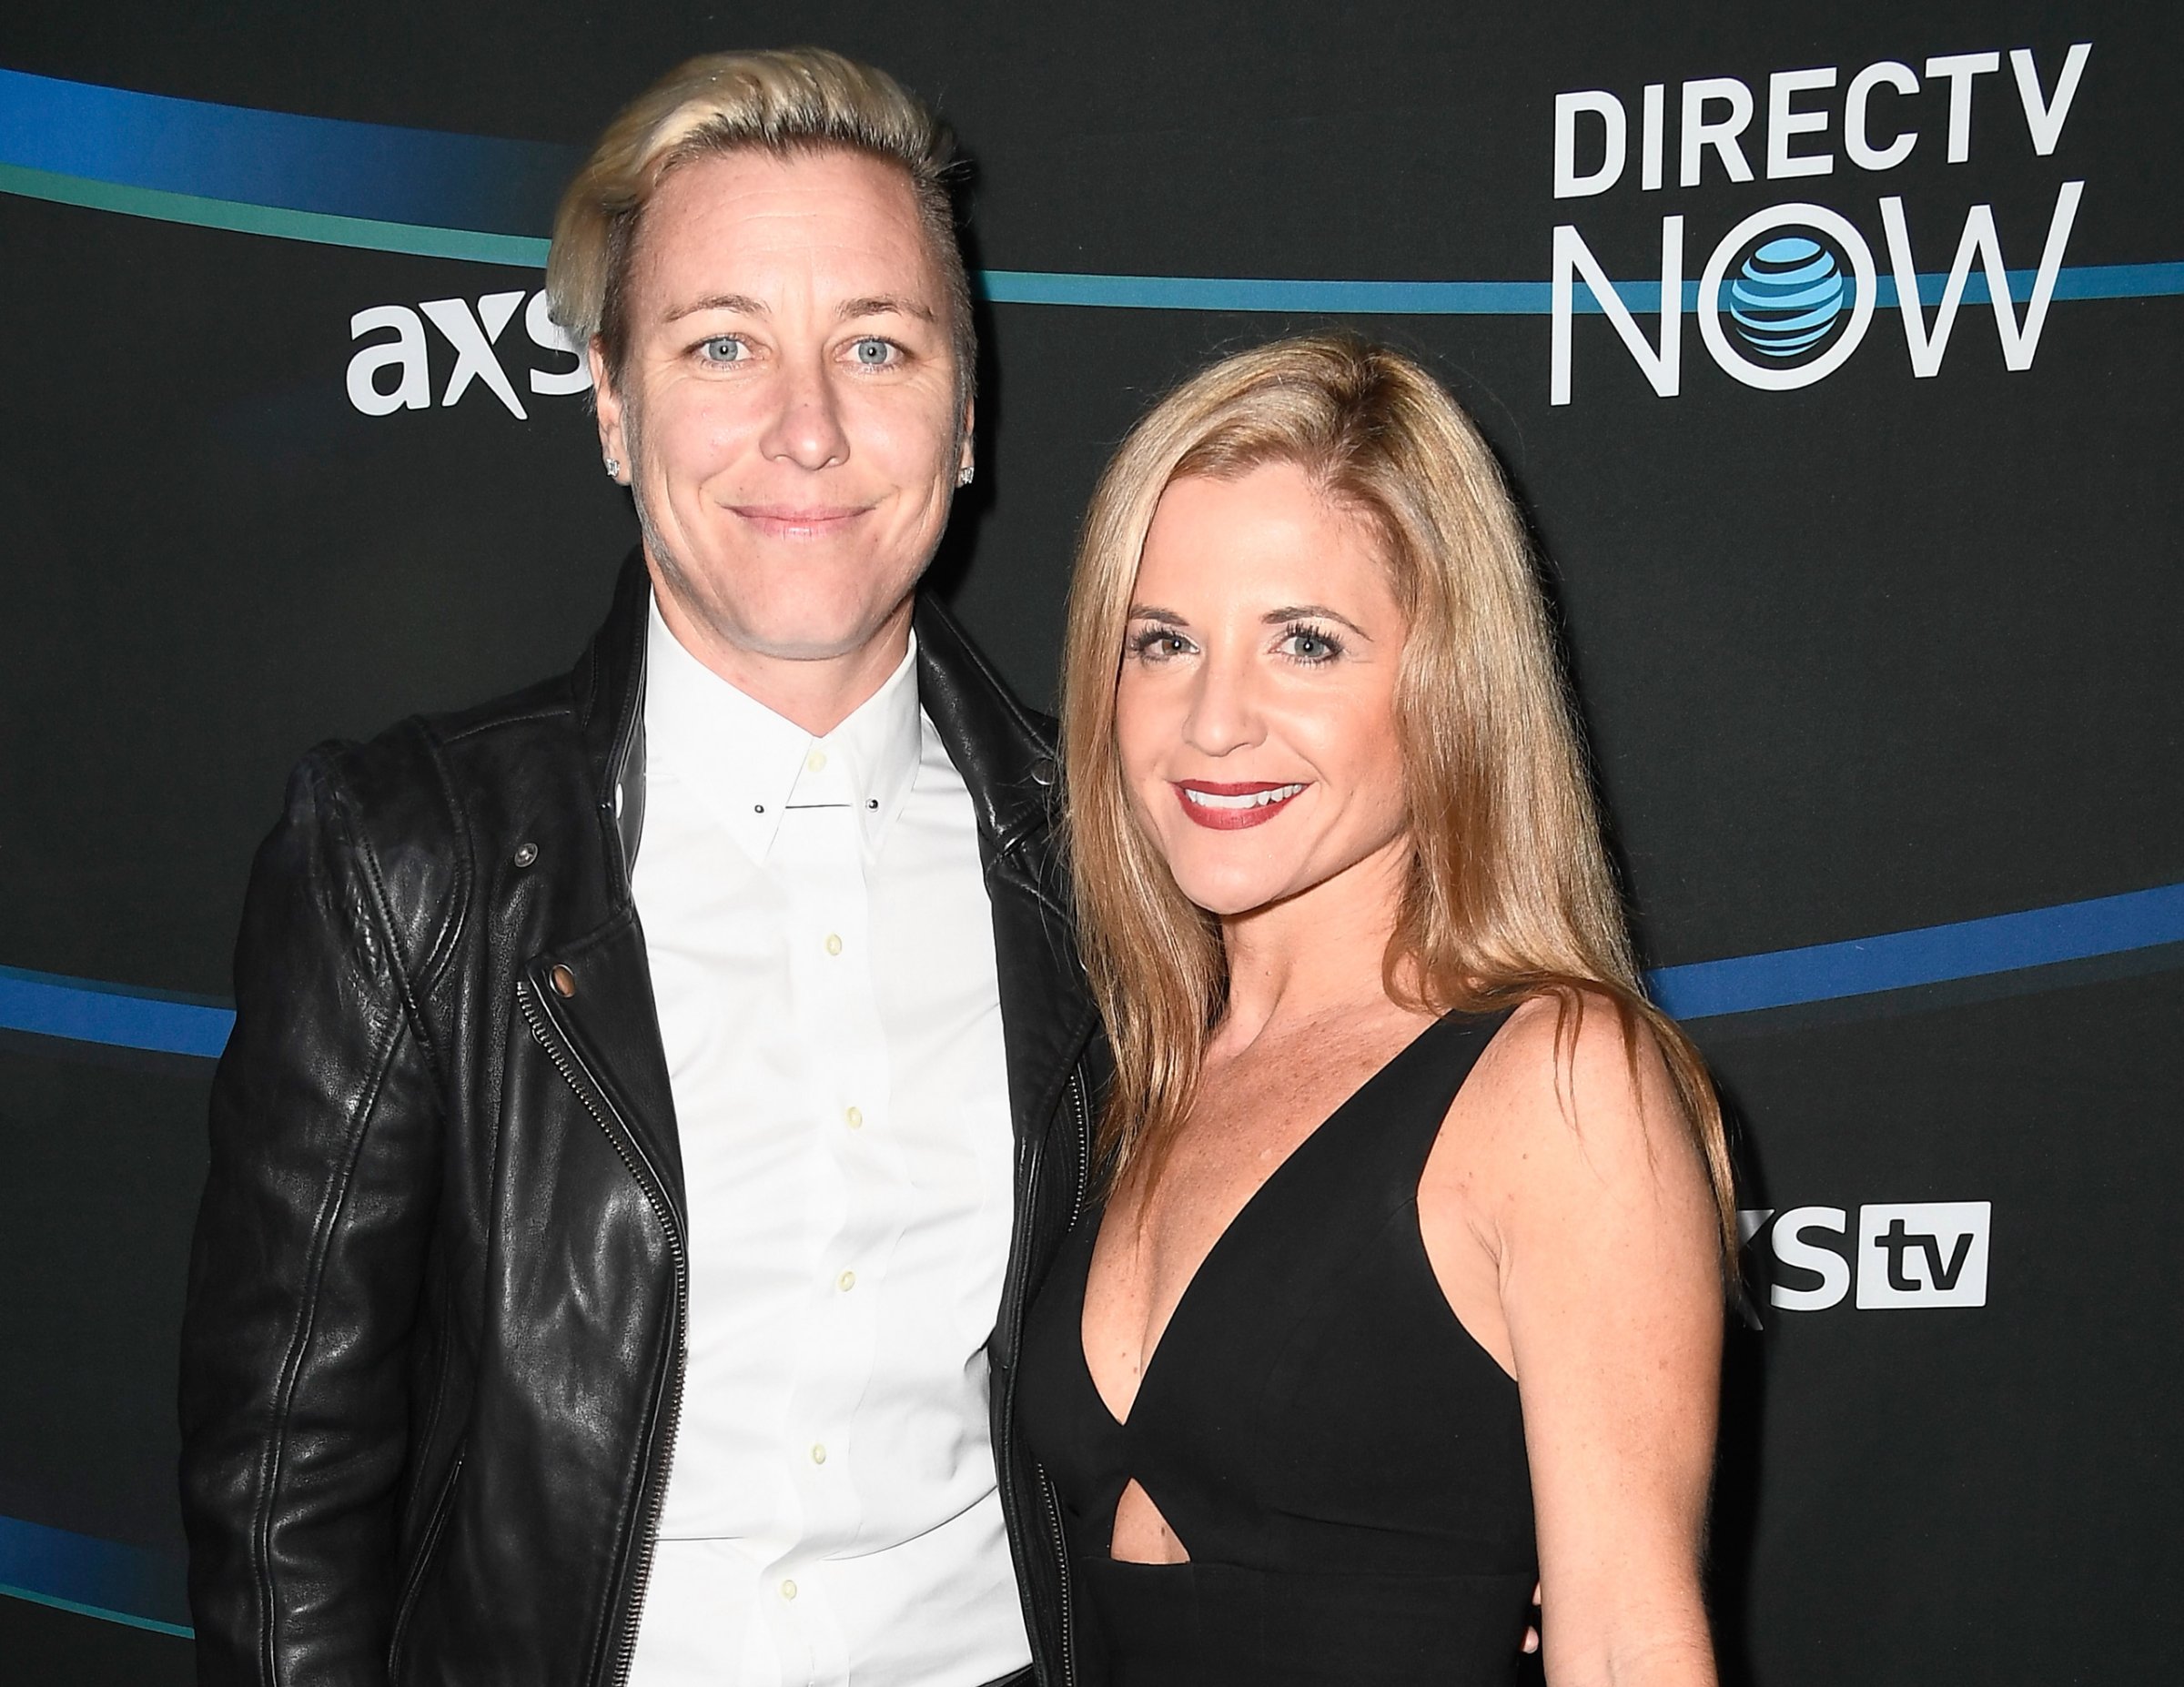 HOUSTON, TX - FEBRUARY 04: Former U.S. Women's Soccer player Abby Wambach (L) and Glennon Doyle Melton attend the 2017 DIRECTV NOW Super Saturday Night Concert at Club Nomadic on February 4, 2017 in Houston, Texas. (Photo by Frazer Harrison/Getty Images for DIRECTV)